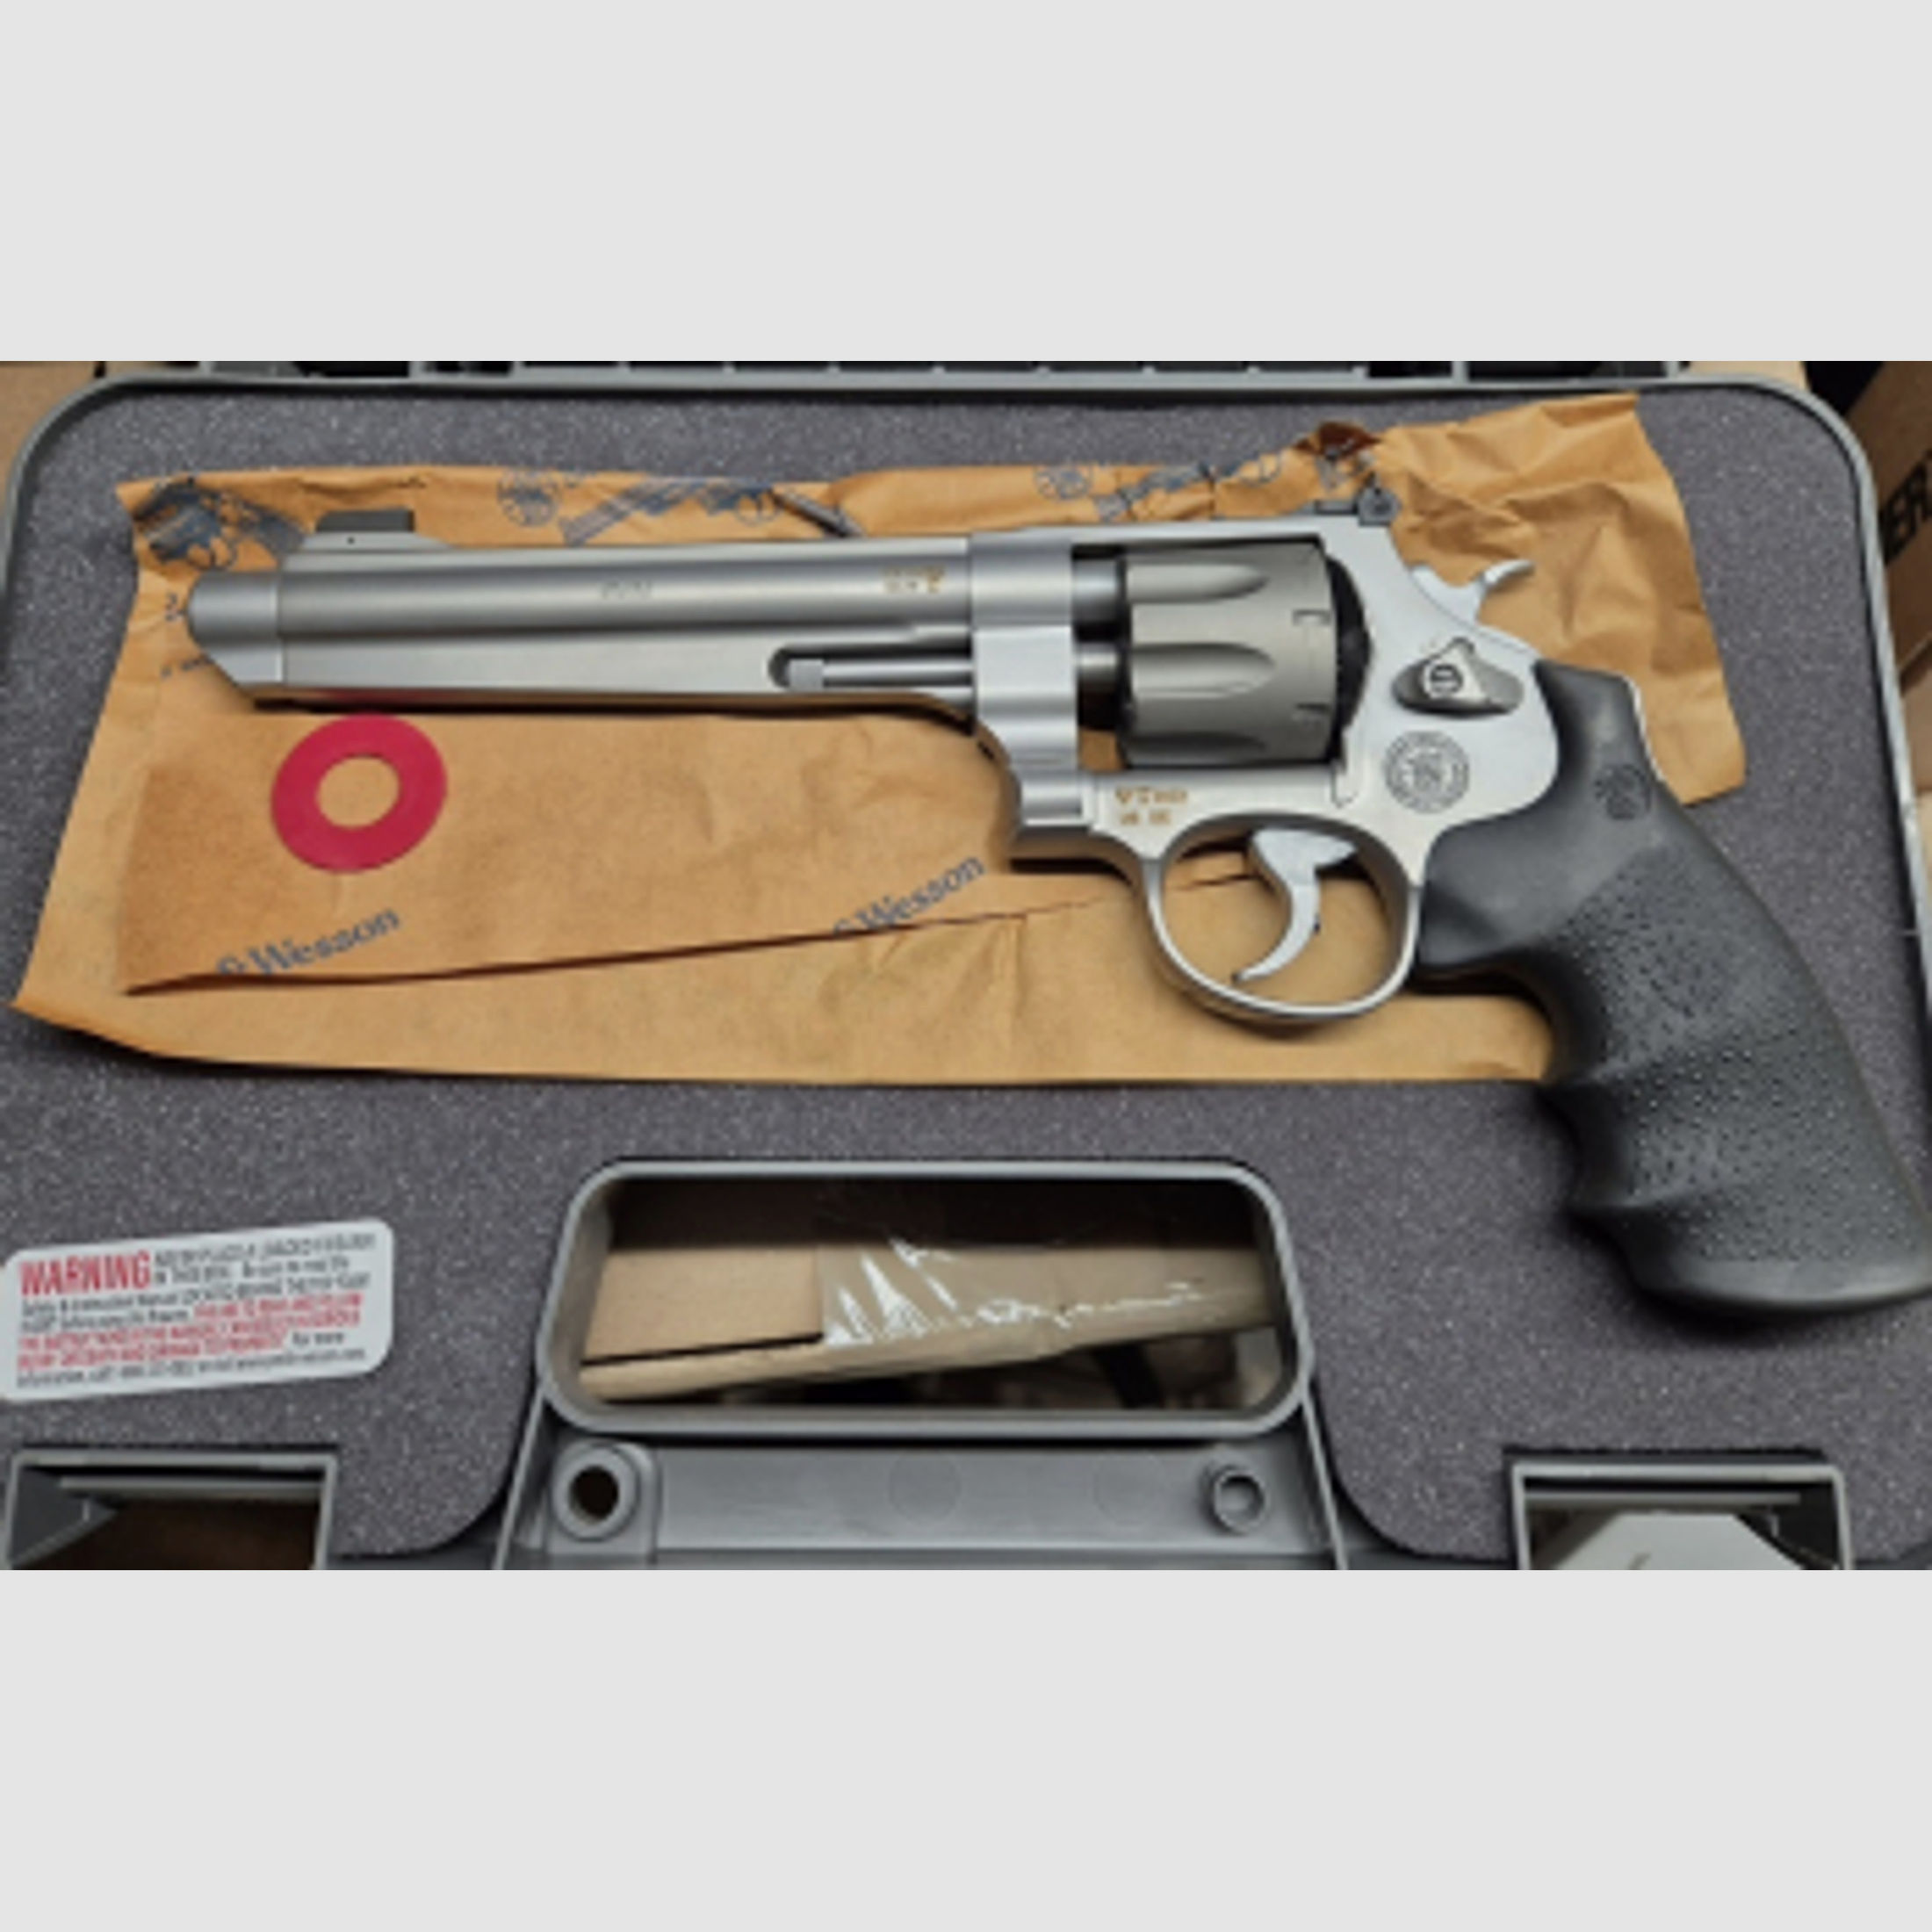 Smith & Wesson 929 Performance Center 9mm Luger